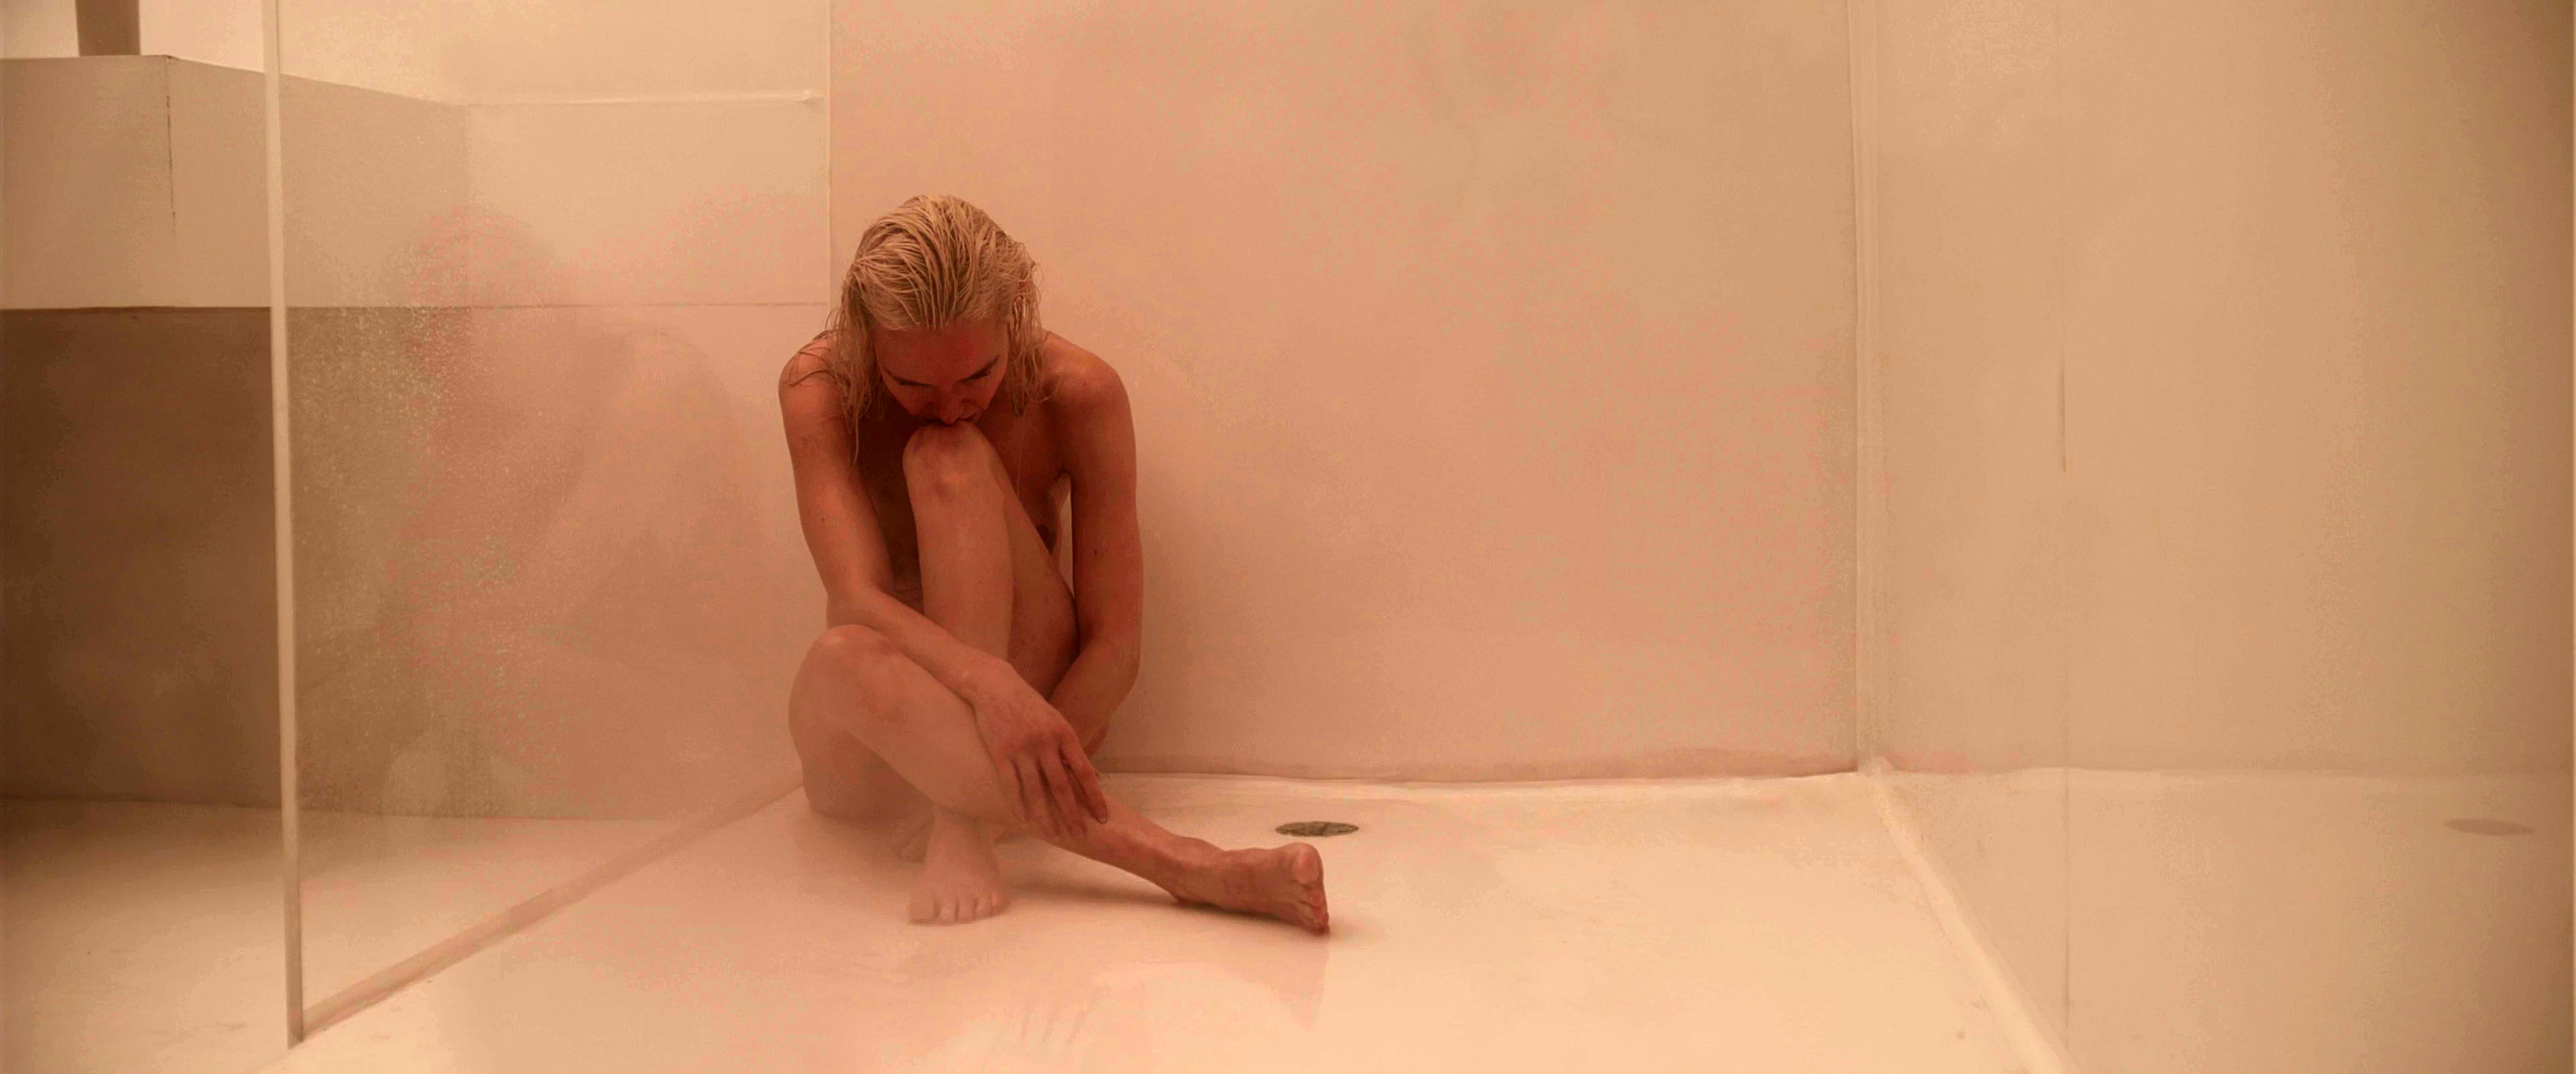 Kate Bosworth Nude